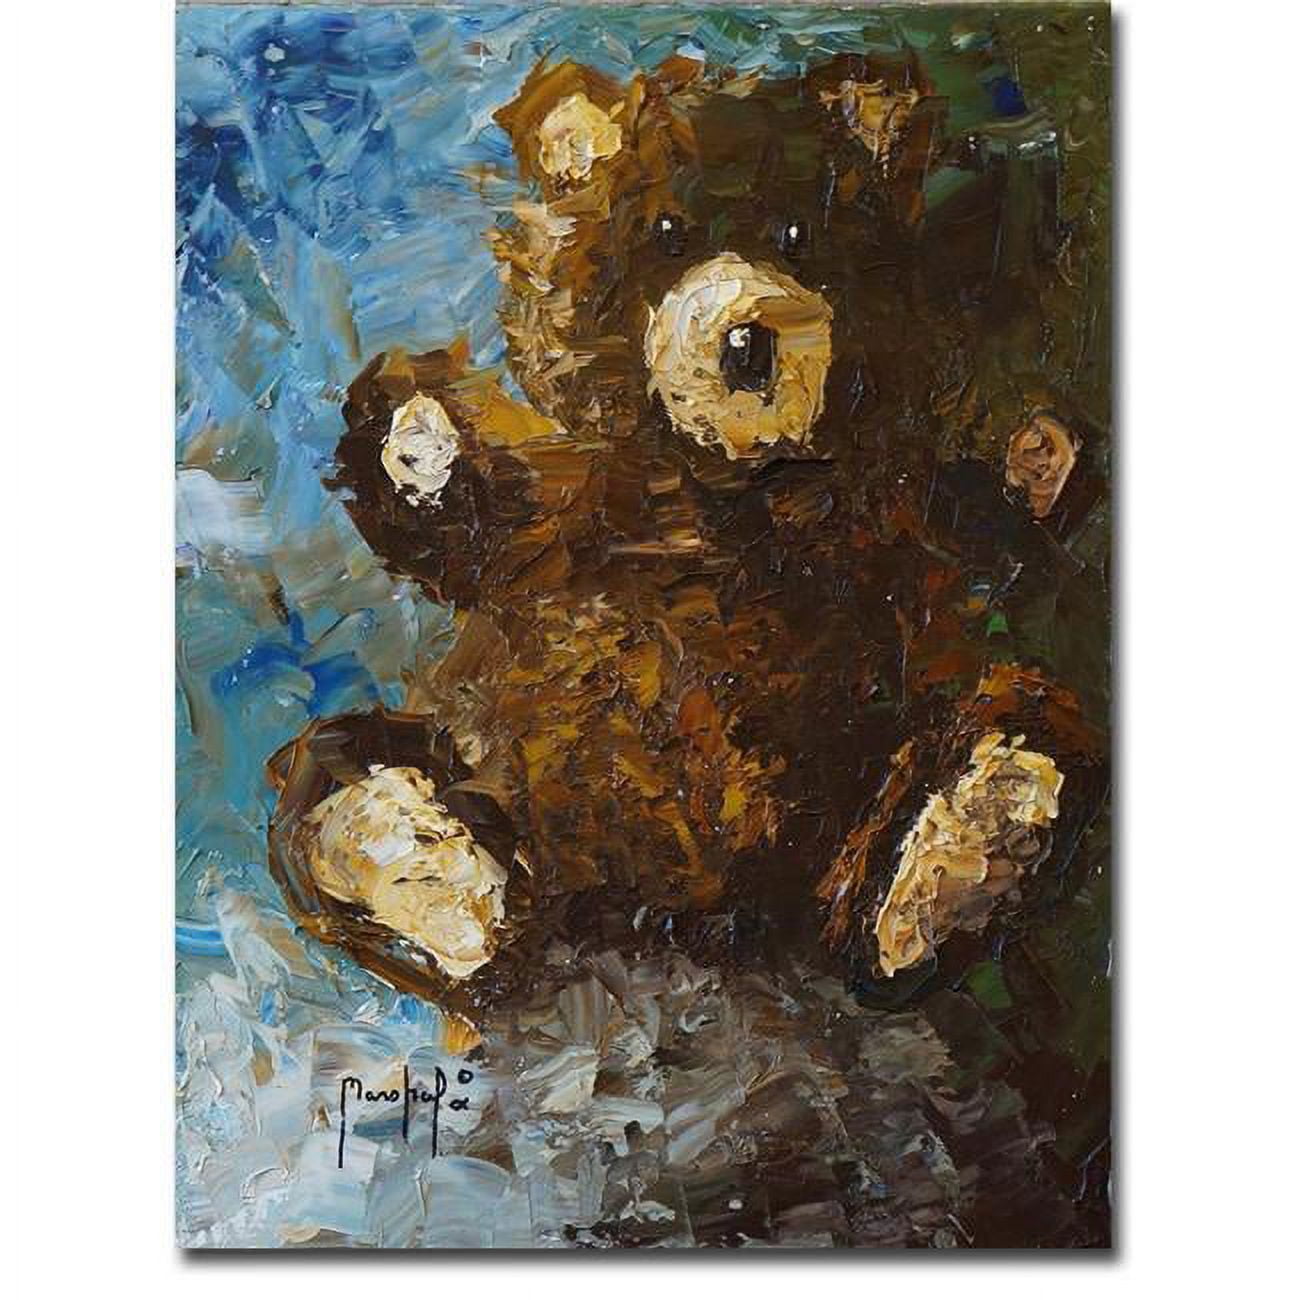 1216896tg Teddy Bear By Joseph Marshal Premium Gallery-wrapped Canvas Giclee Art - 16 X 12 In.